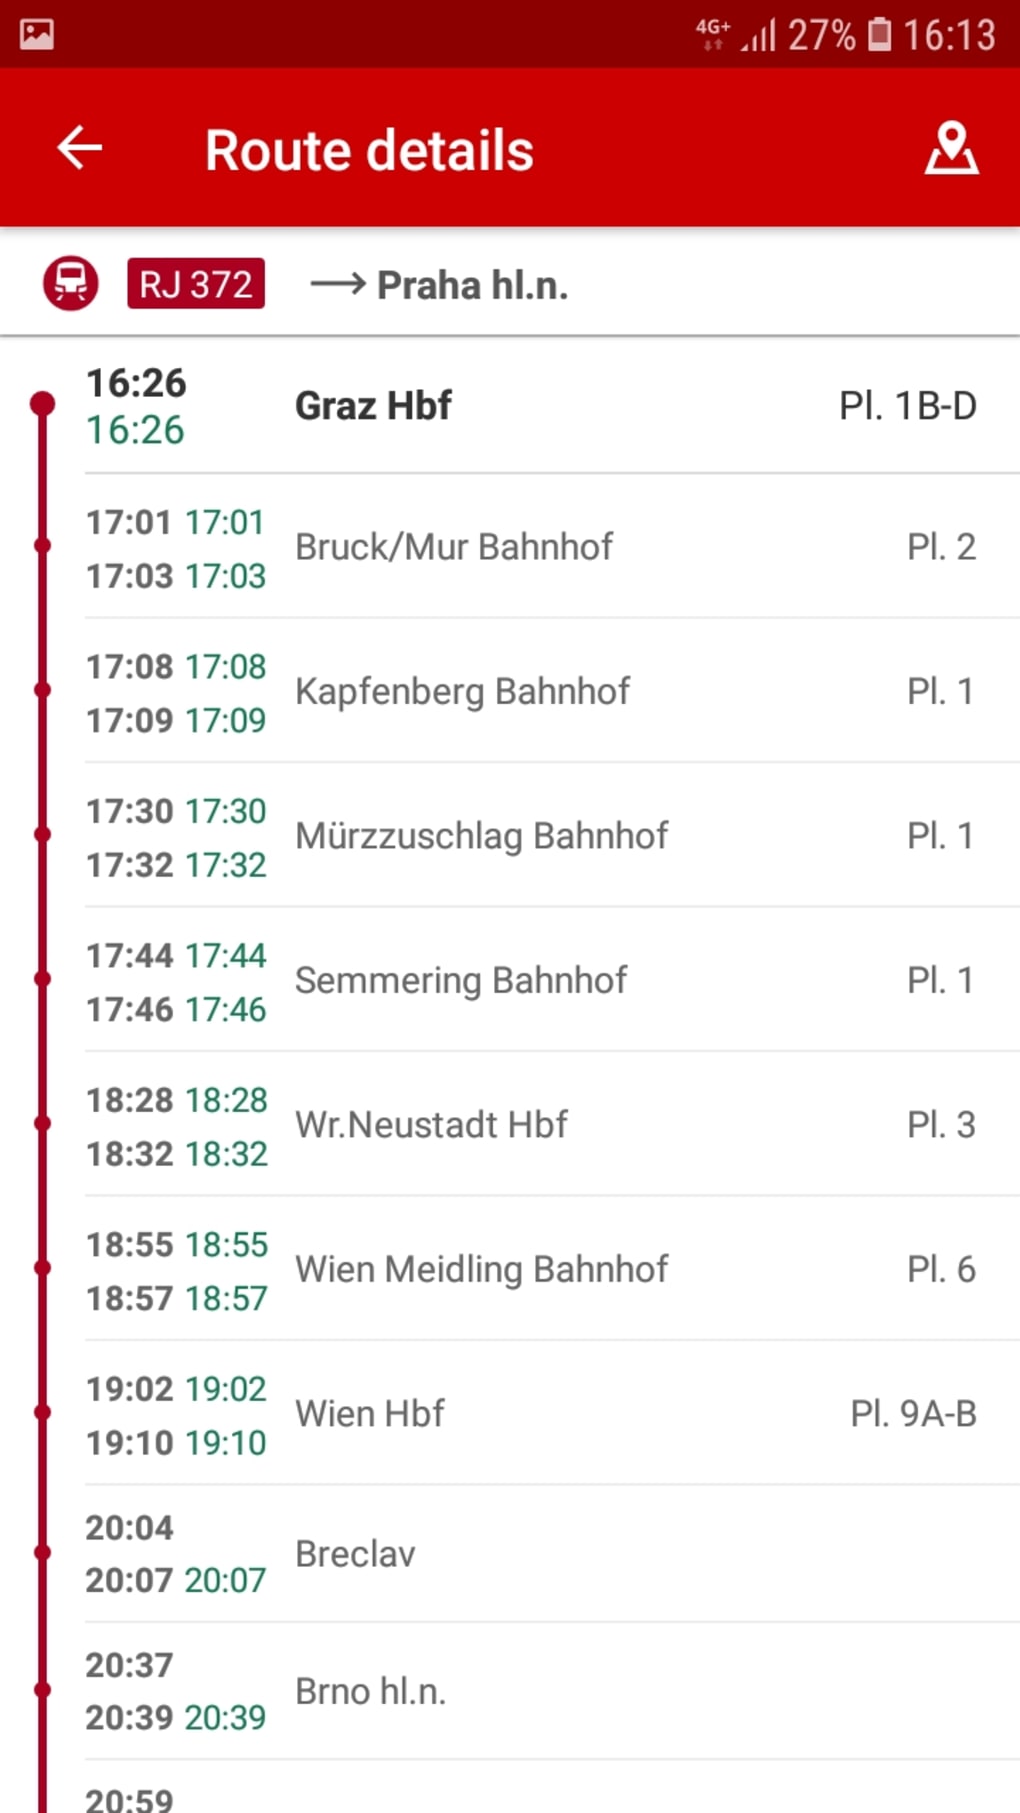 ÖBB Scotty APK for Android - Download